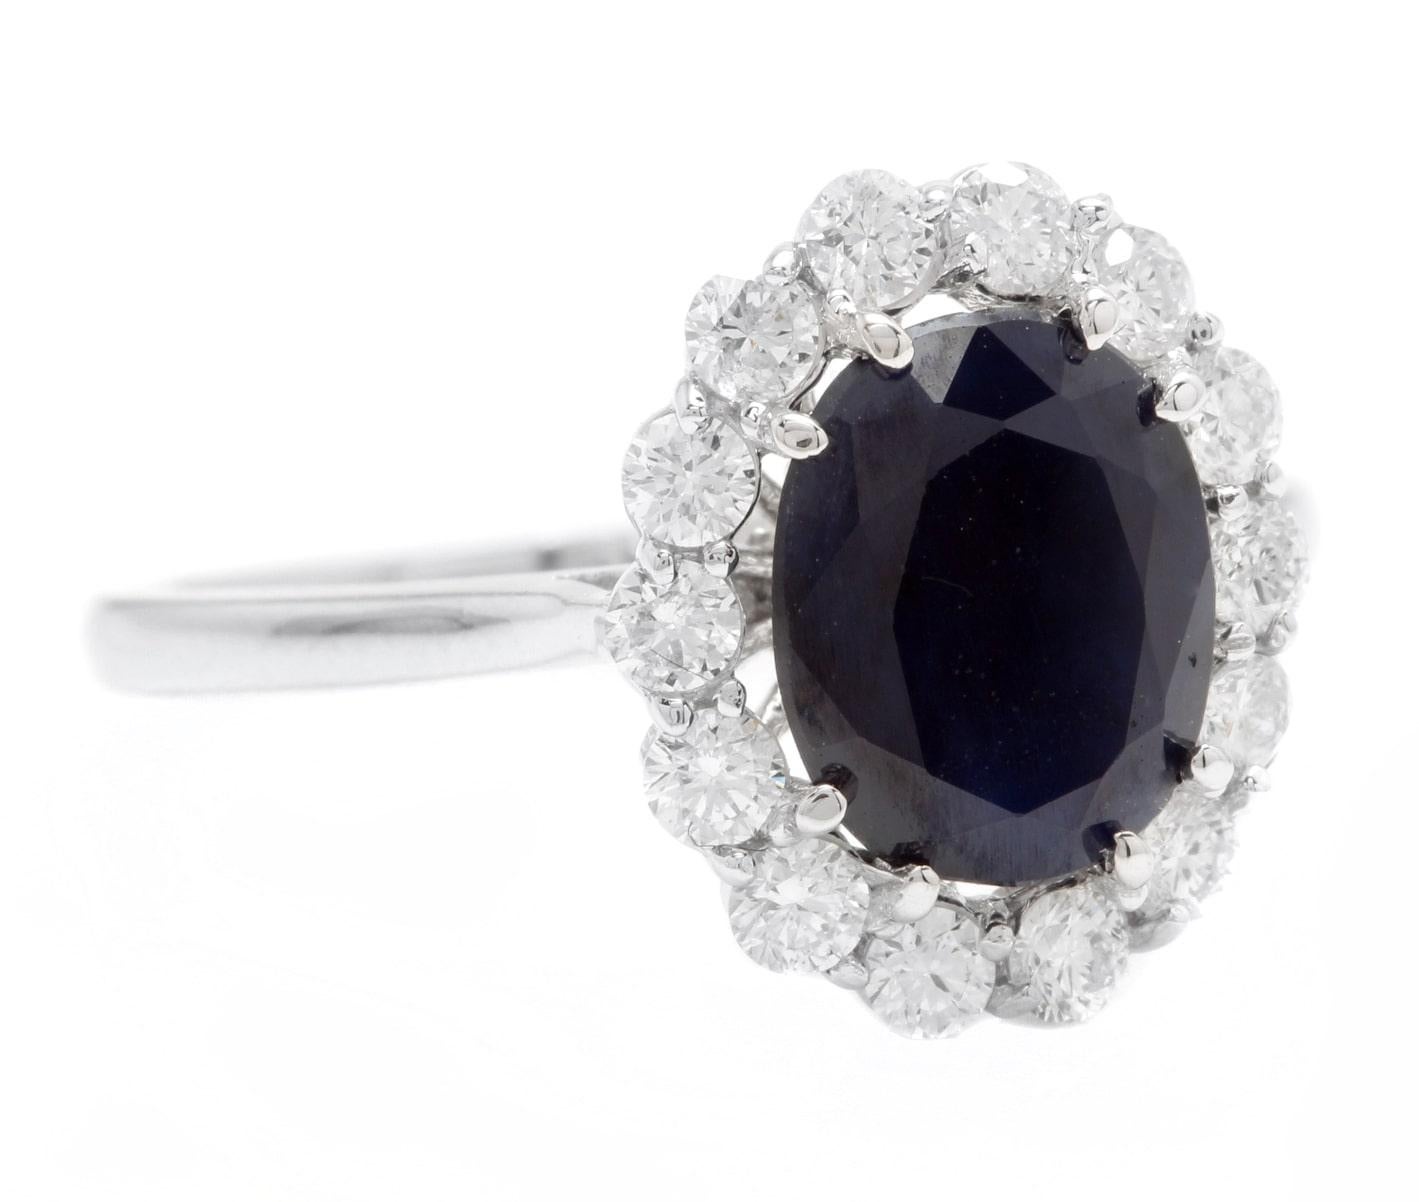 3.60 Carats Natural Sapphire and Diamond 14K Solid White Gold Ring

Suggested Replacement Value: Approx. $4,500.00

Total Natural Oval Cut Sapphire Weights: Approx. 3.00 Carats 

Sapphire Measures: Approx. 9.00 x 7.00mm

Sapphire Treatment: